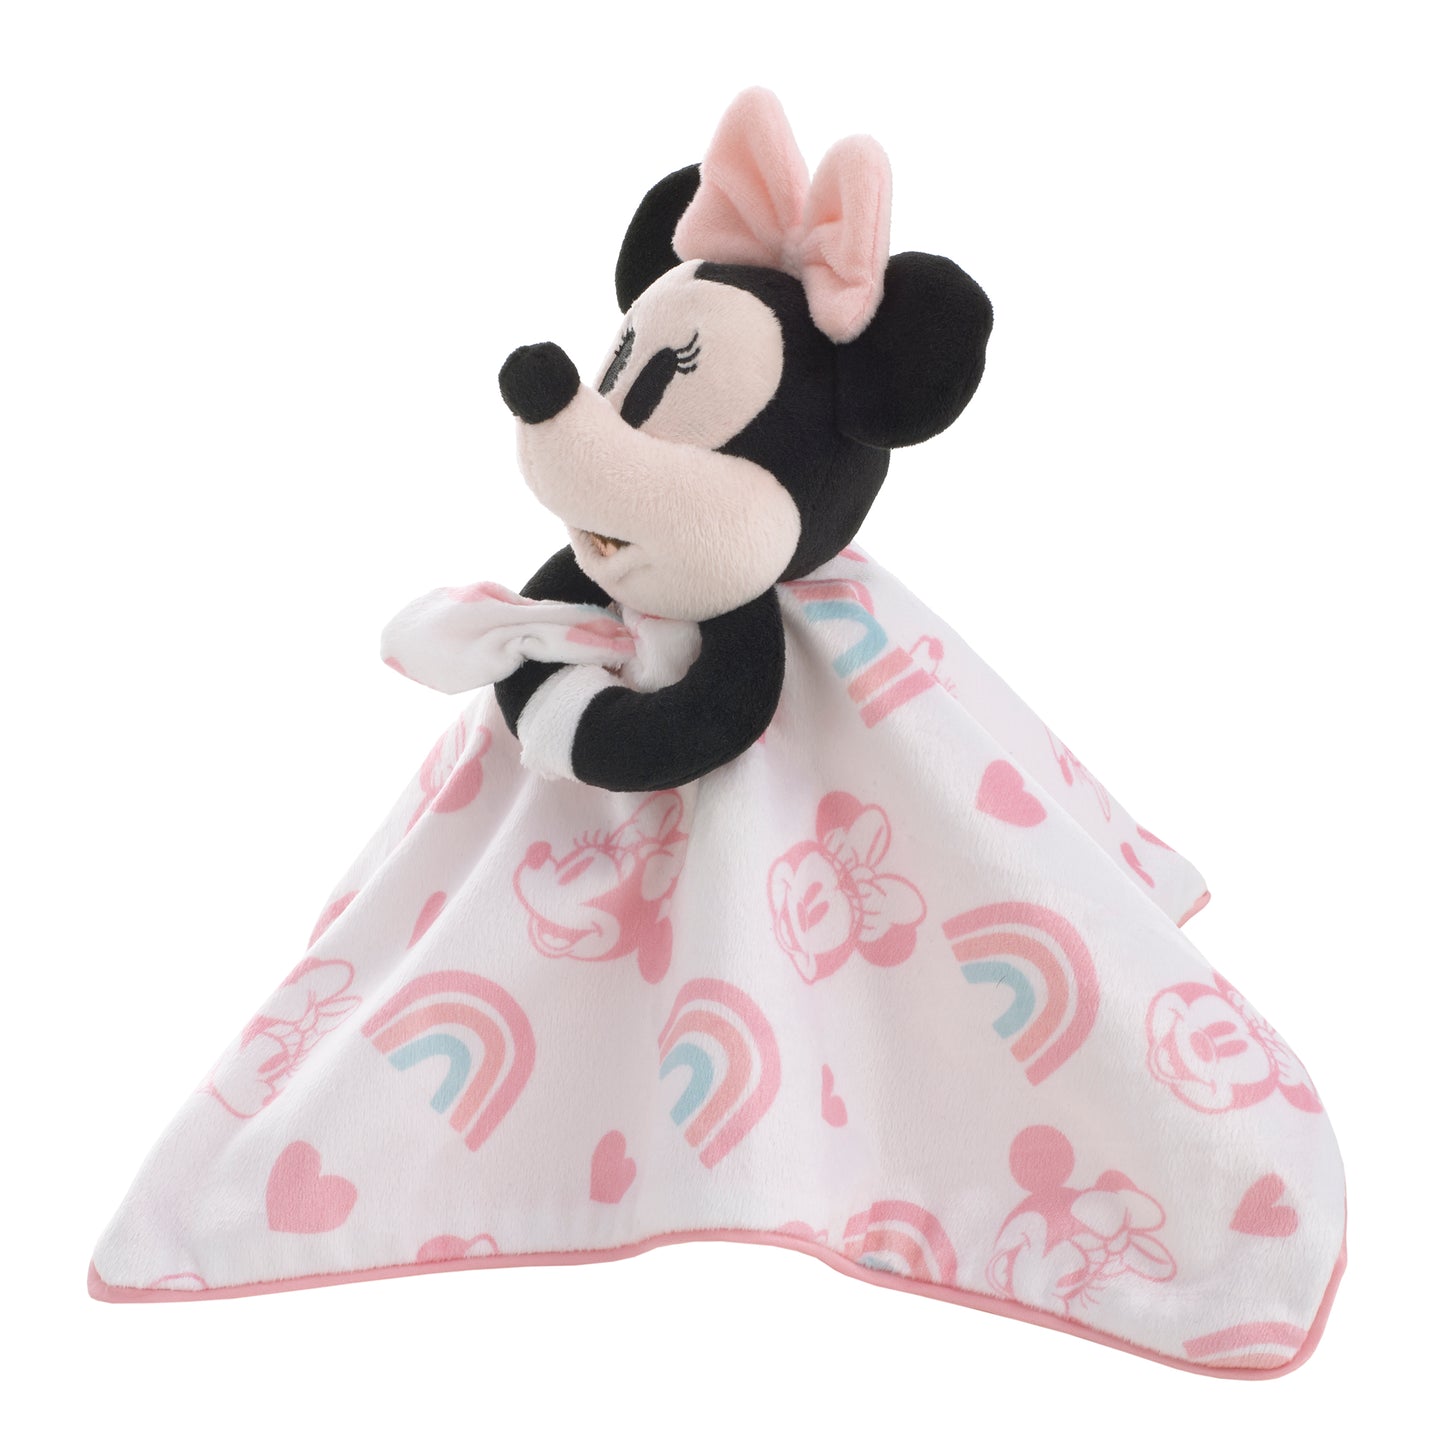 Disney Minnie Mouse White, Pink, and Aqua Rainbow and Heart Lovey Security Blanket